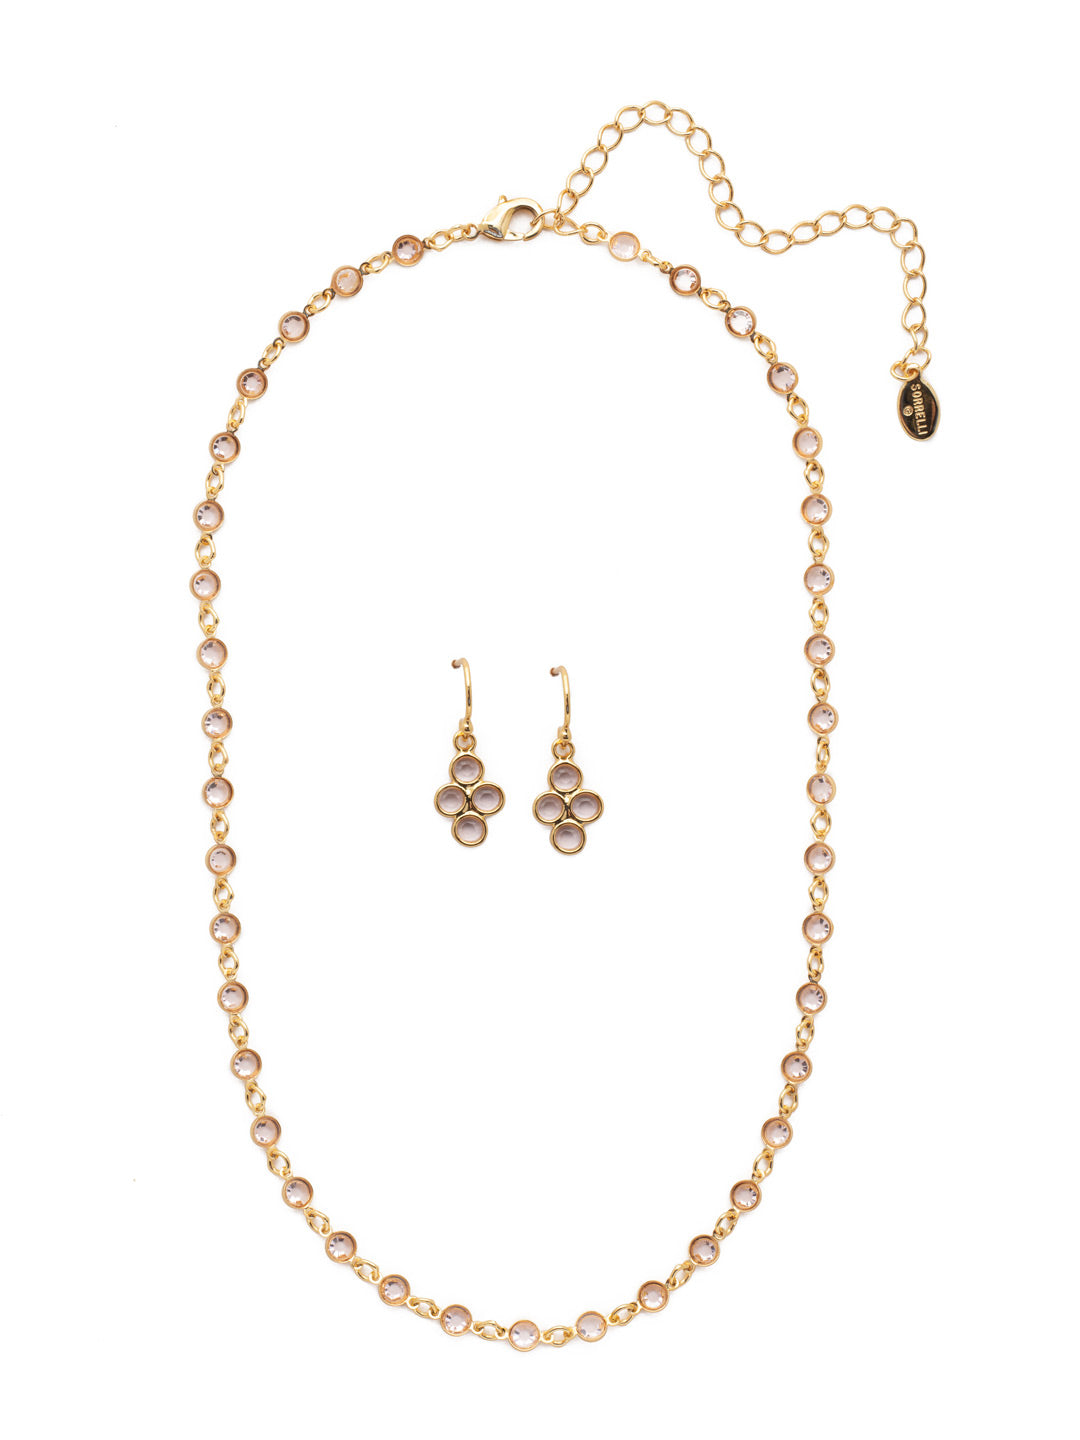 Perfect Pair Necklace/Earring Gift Set - GEP9392BGSIL